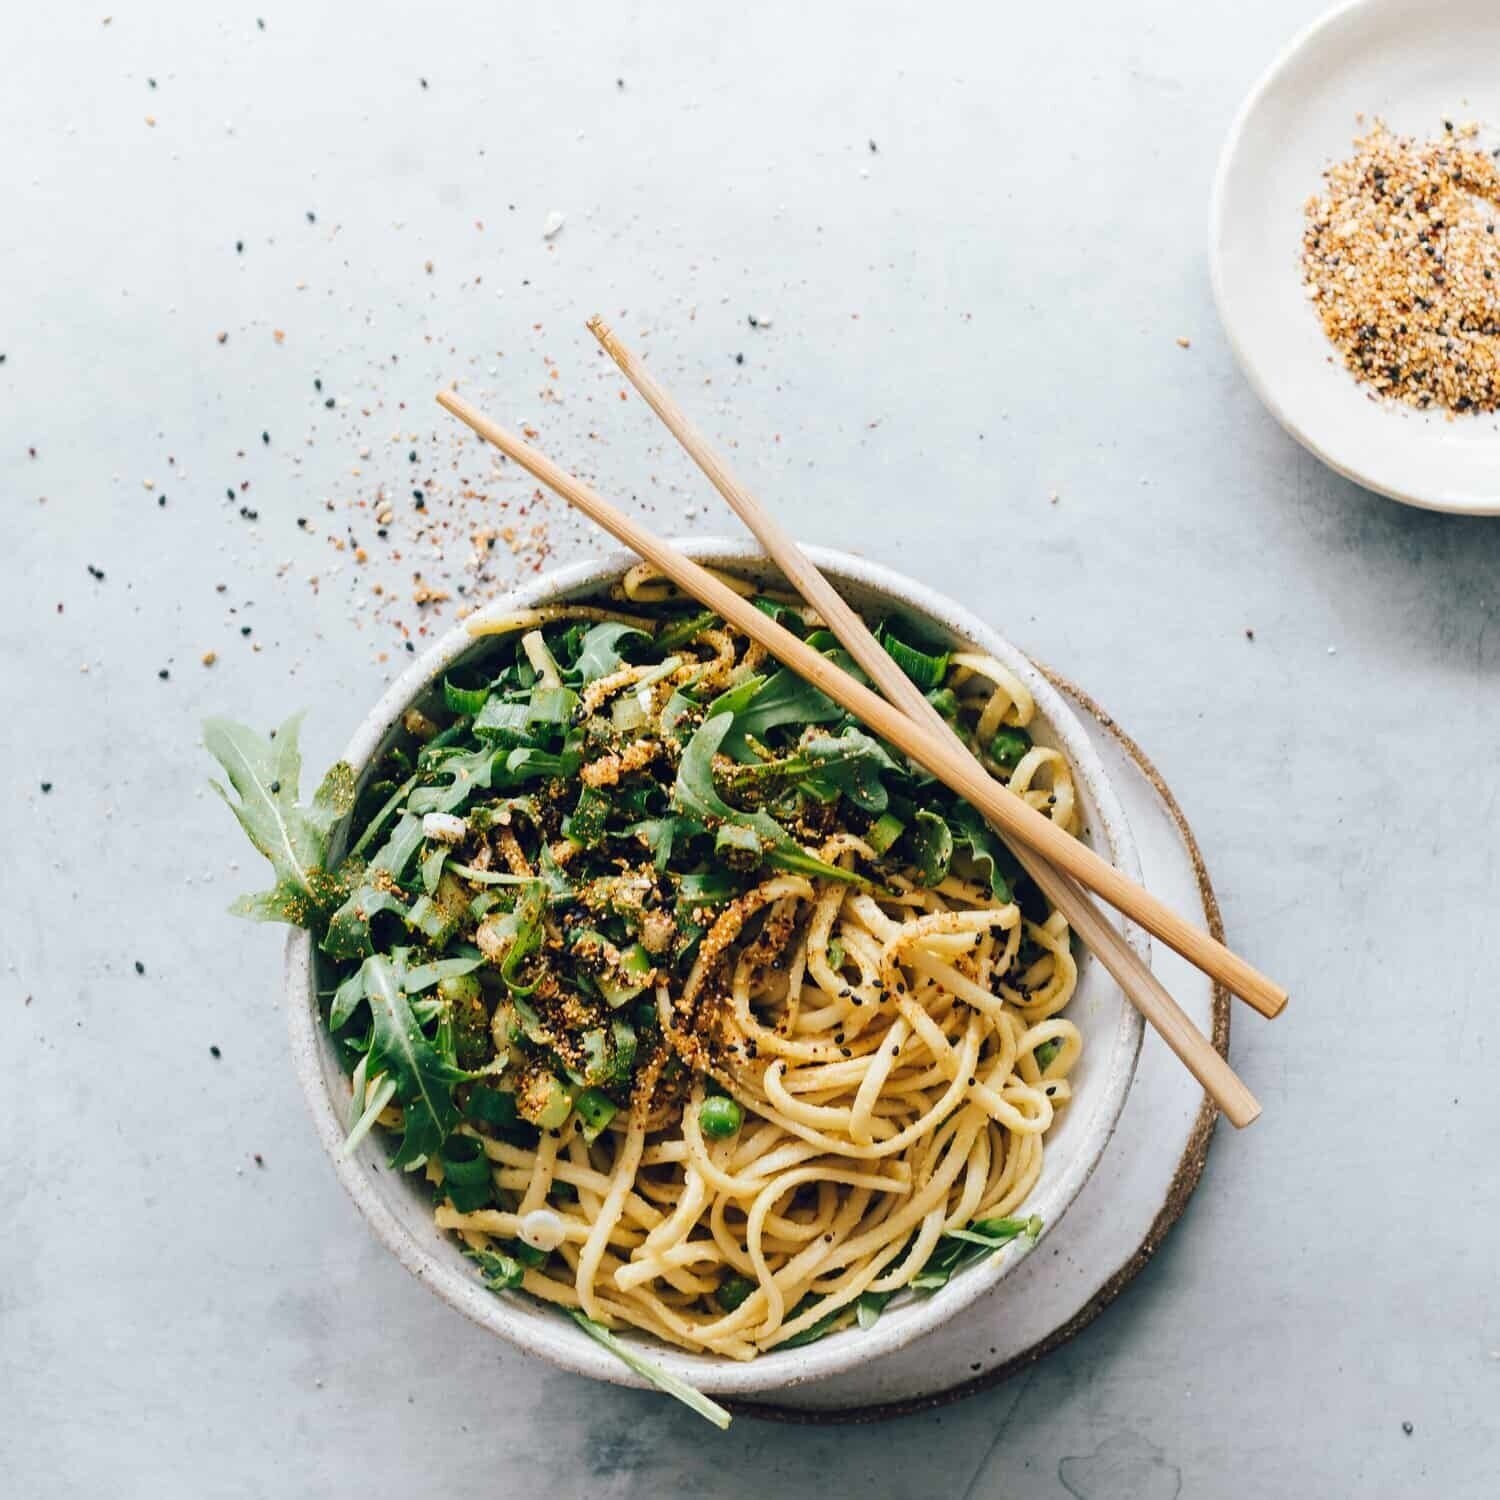 Thermomix 15-Minute Miso Noodles Recipe (Vegan!)